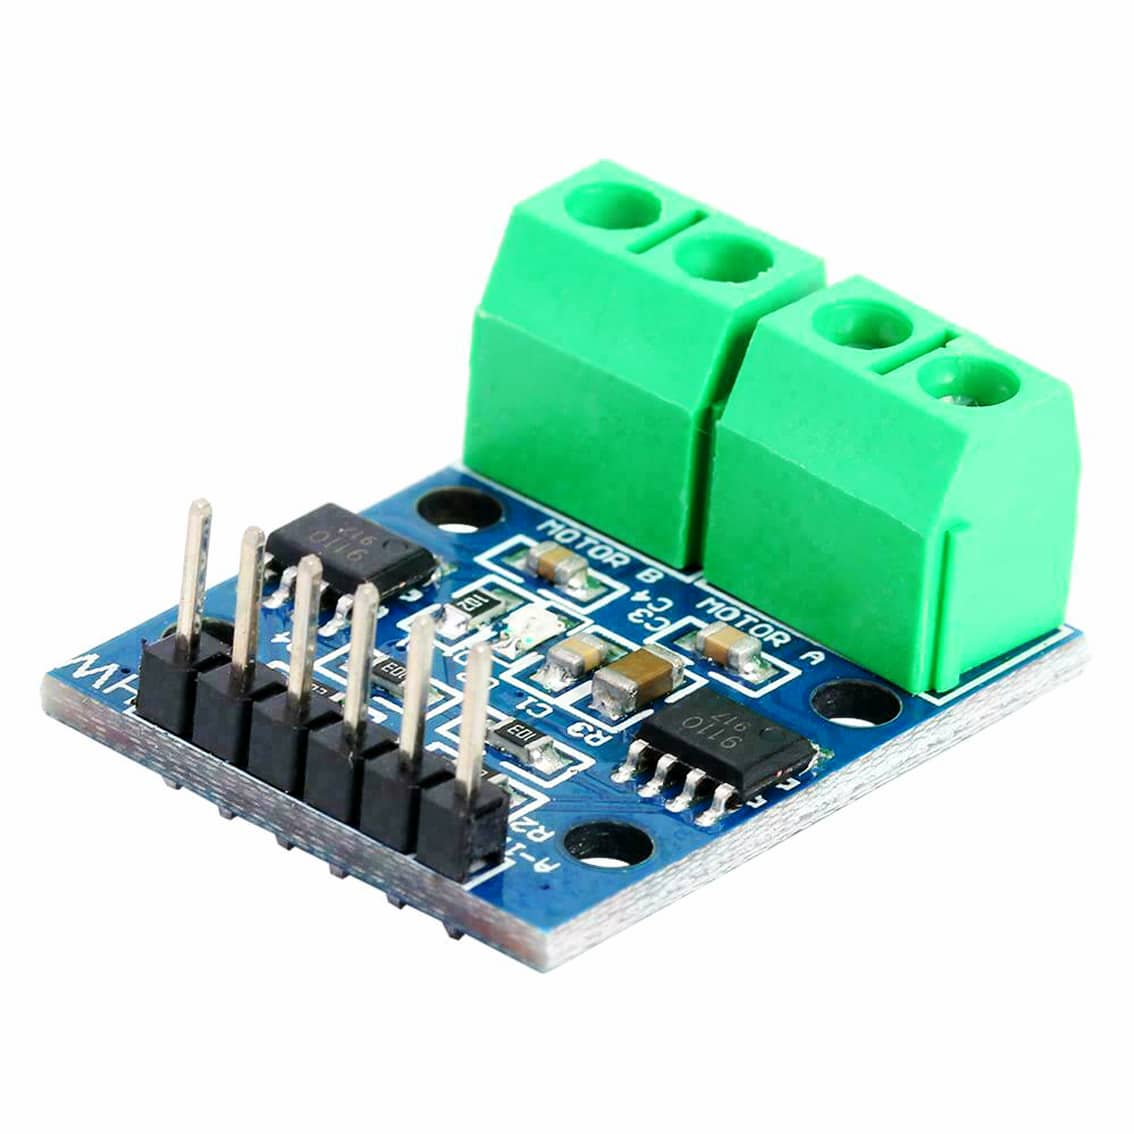 PHI1072275 – HG7811 Dual Channel Motor Driver Board 01